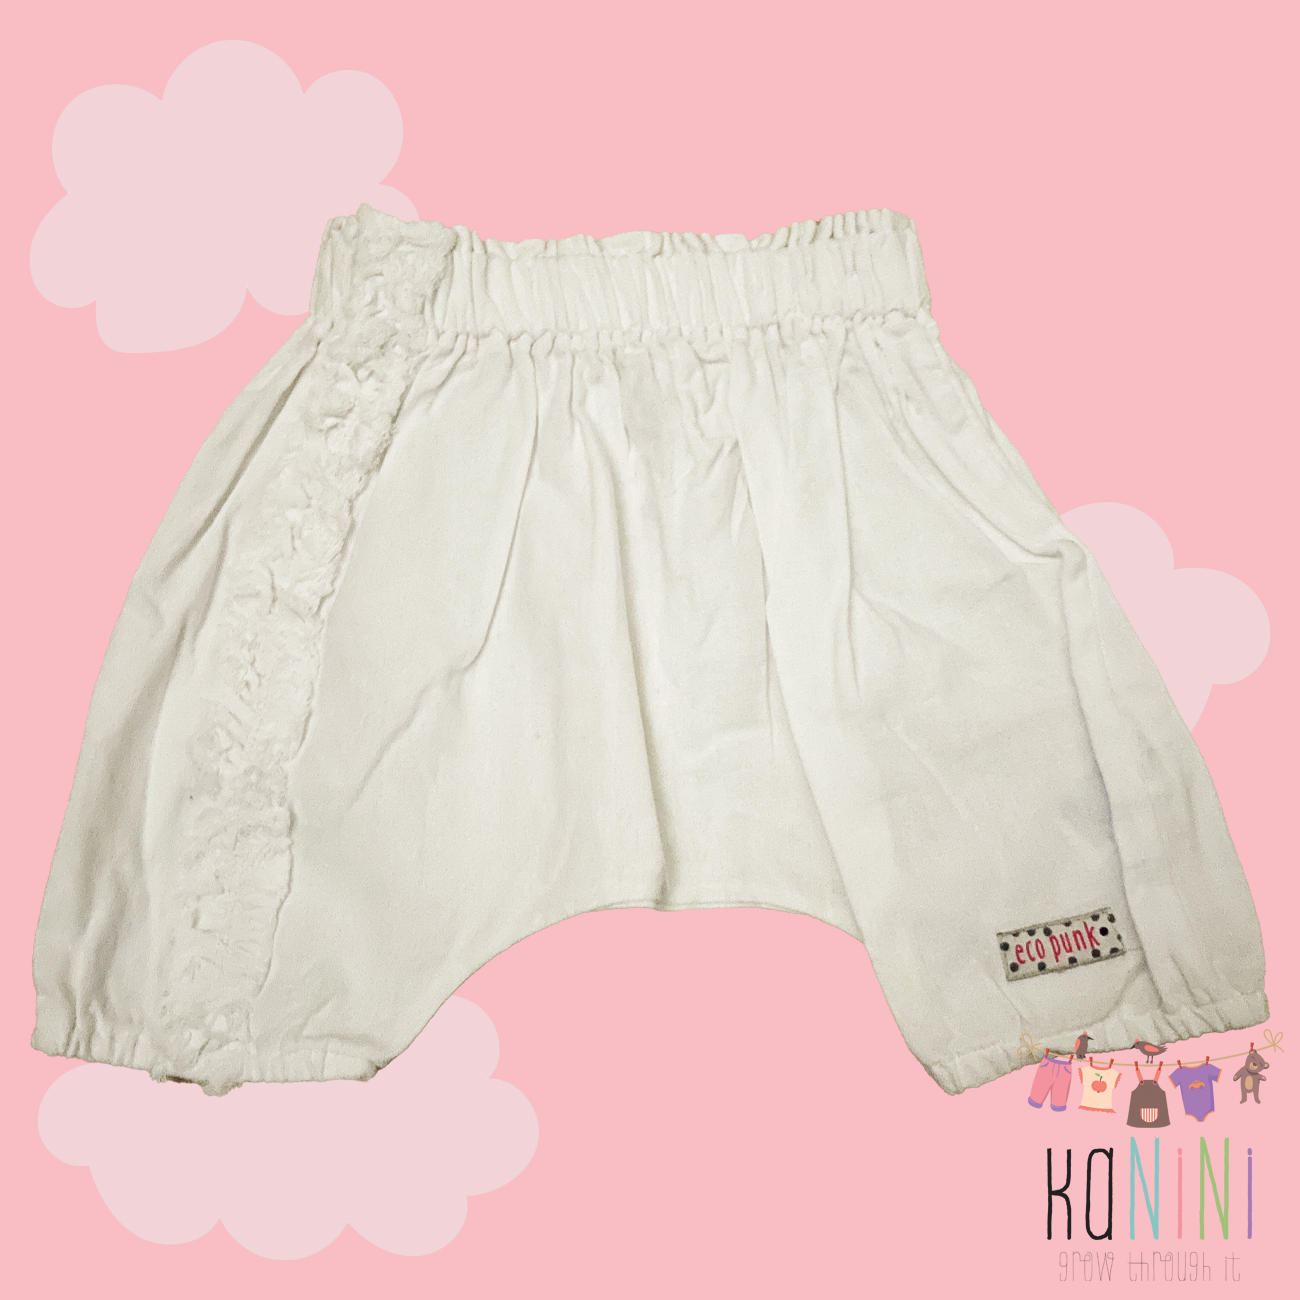 Featured image for “Eco Punk 6 - 12 Months Girls White Harem Pants”